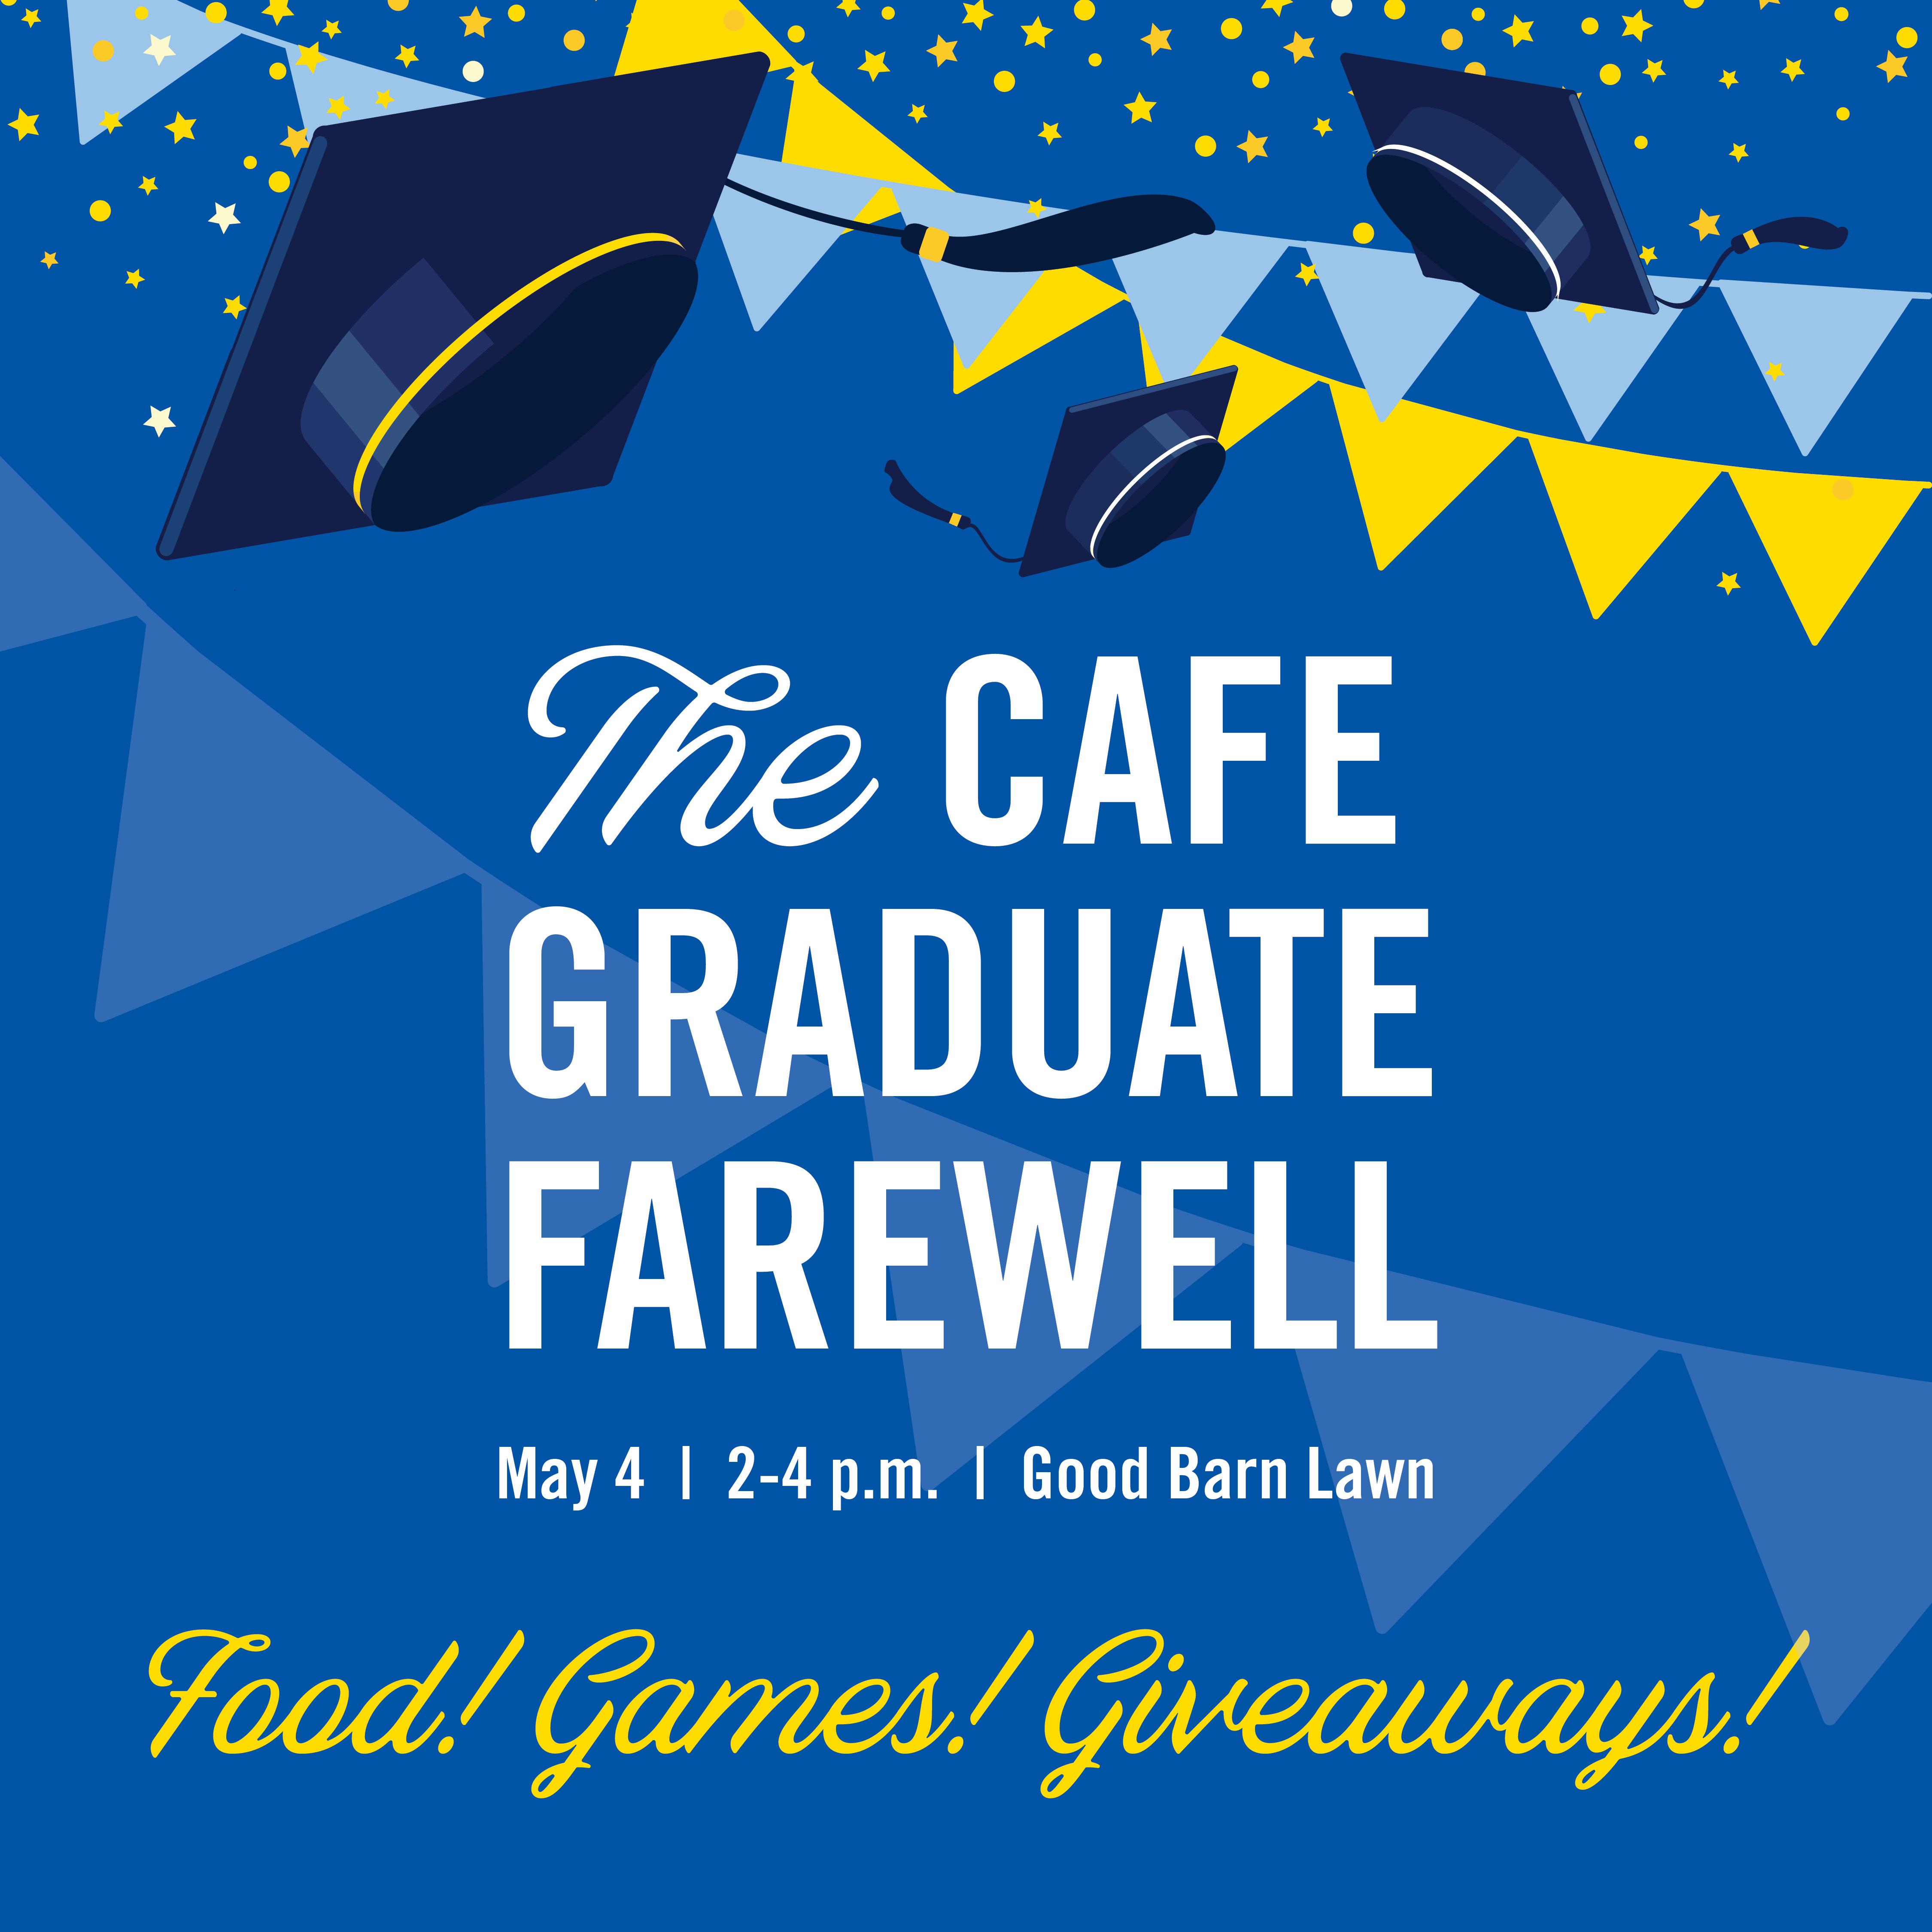 The CAFE Graduate Farewell on May 4 from 2 - 4 p.m. on the lawn of the E. S. Good Barn. Enjoy food, games, and giveaways!